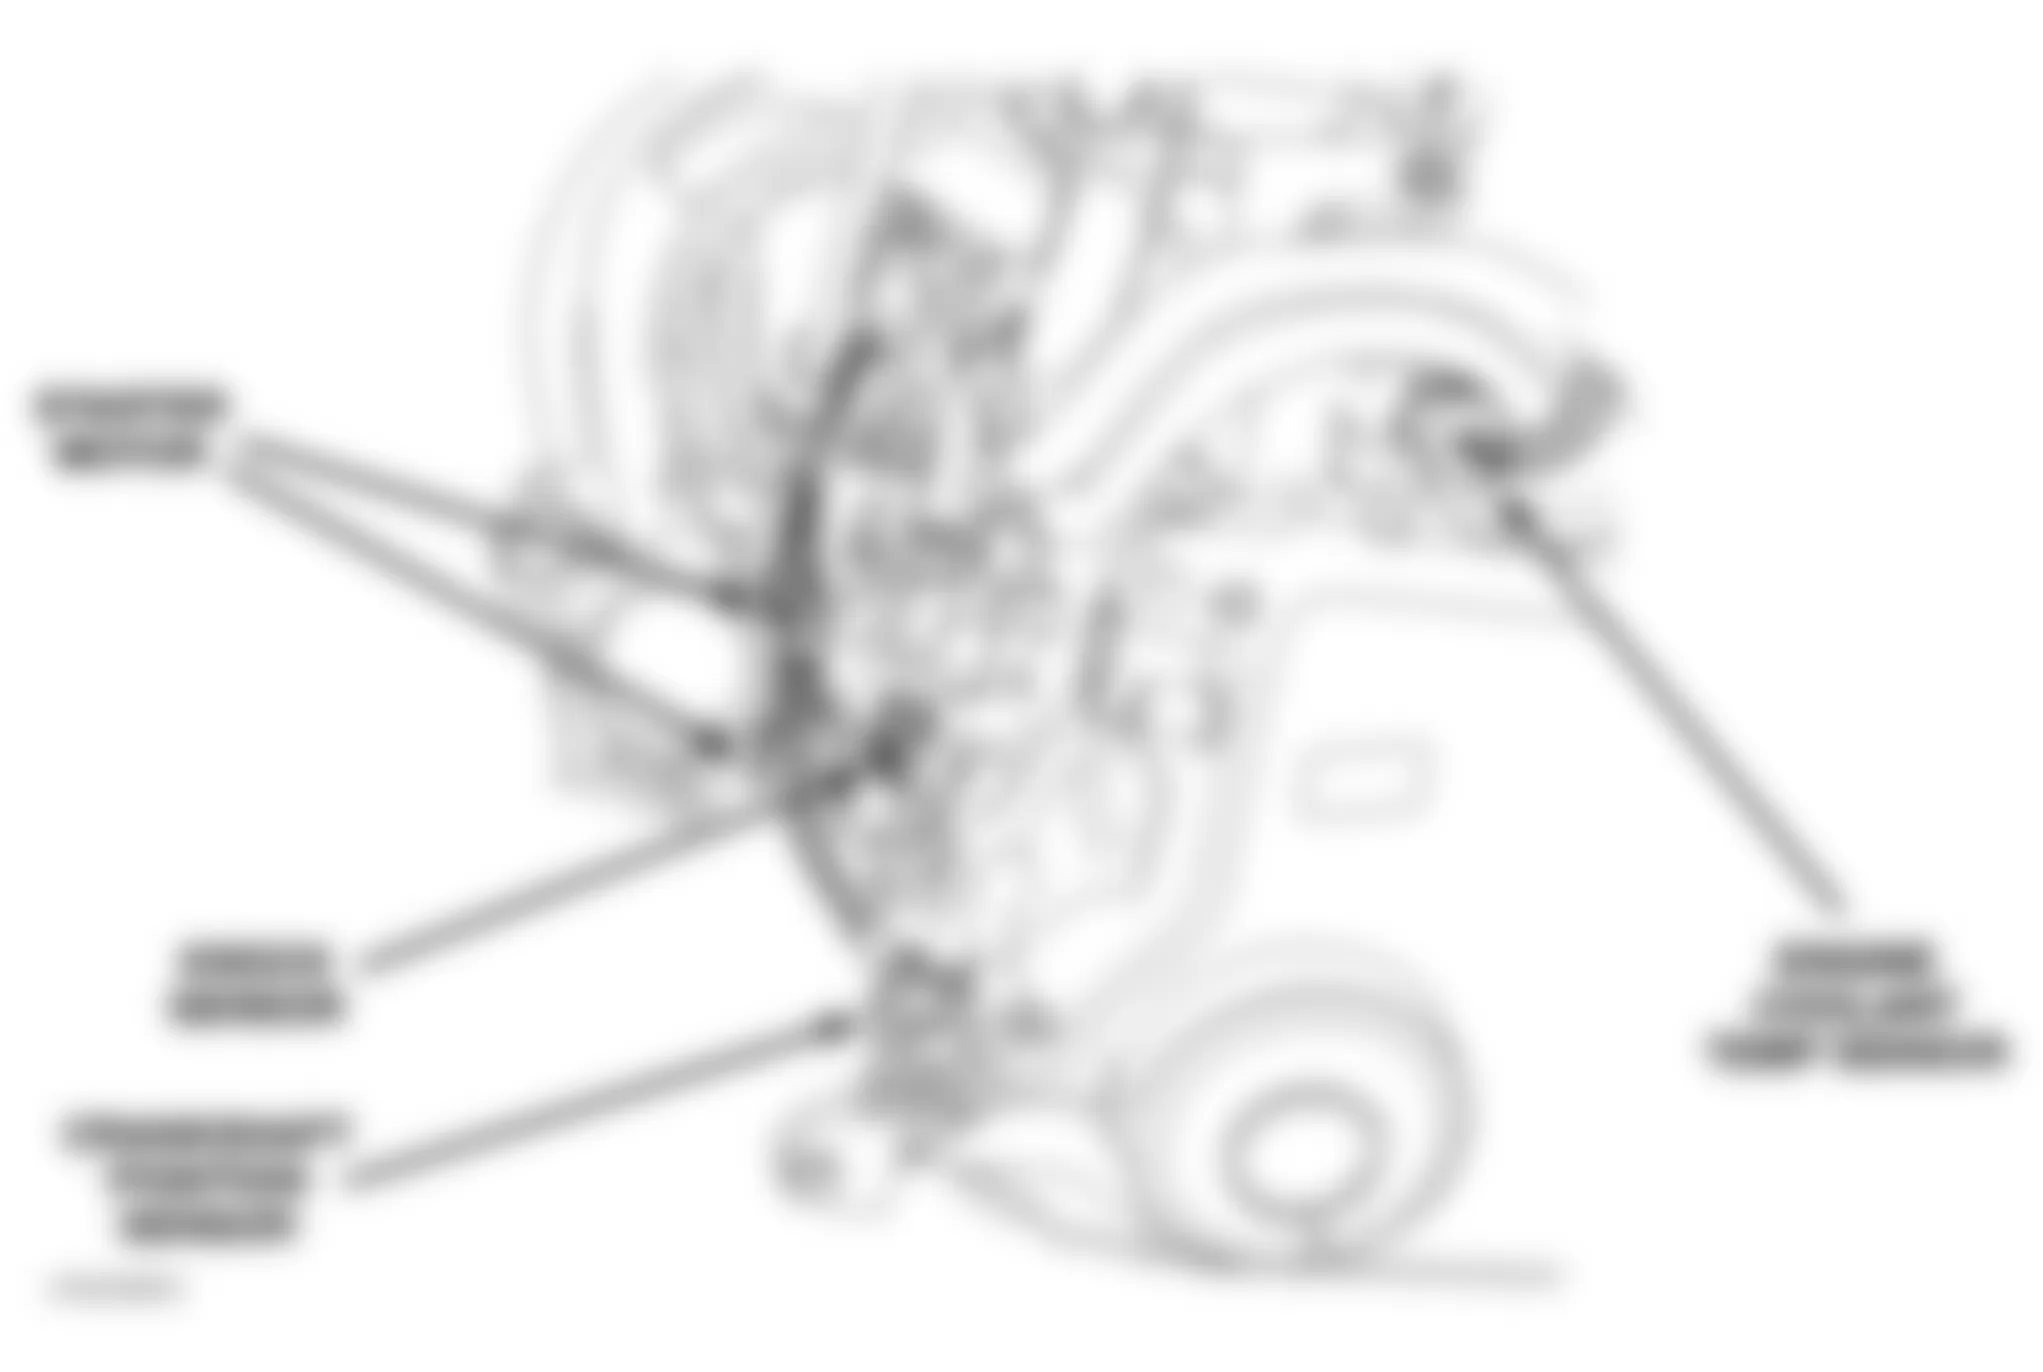 Dodge Neon R/T 2004 - Component Locations -  Left Front Of Engine (2.0L)